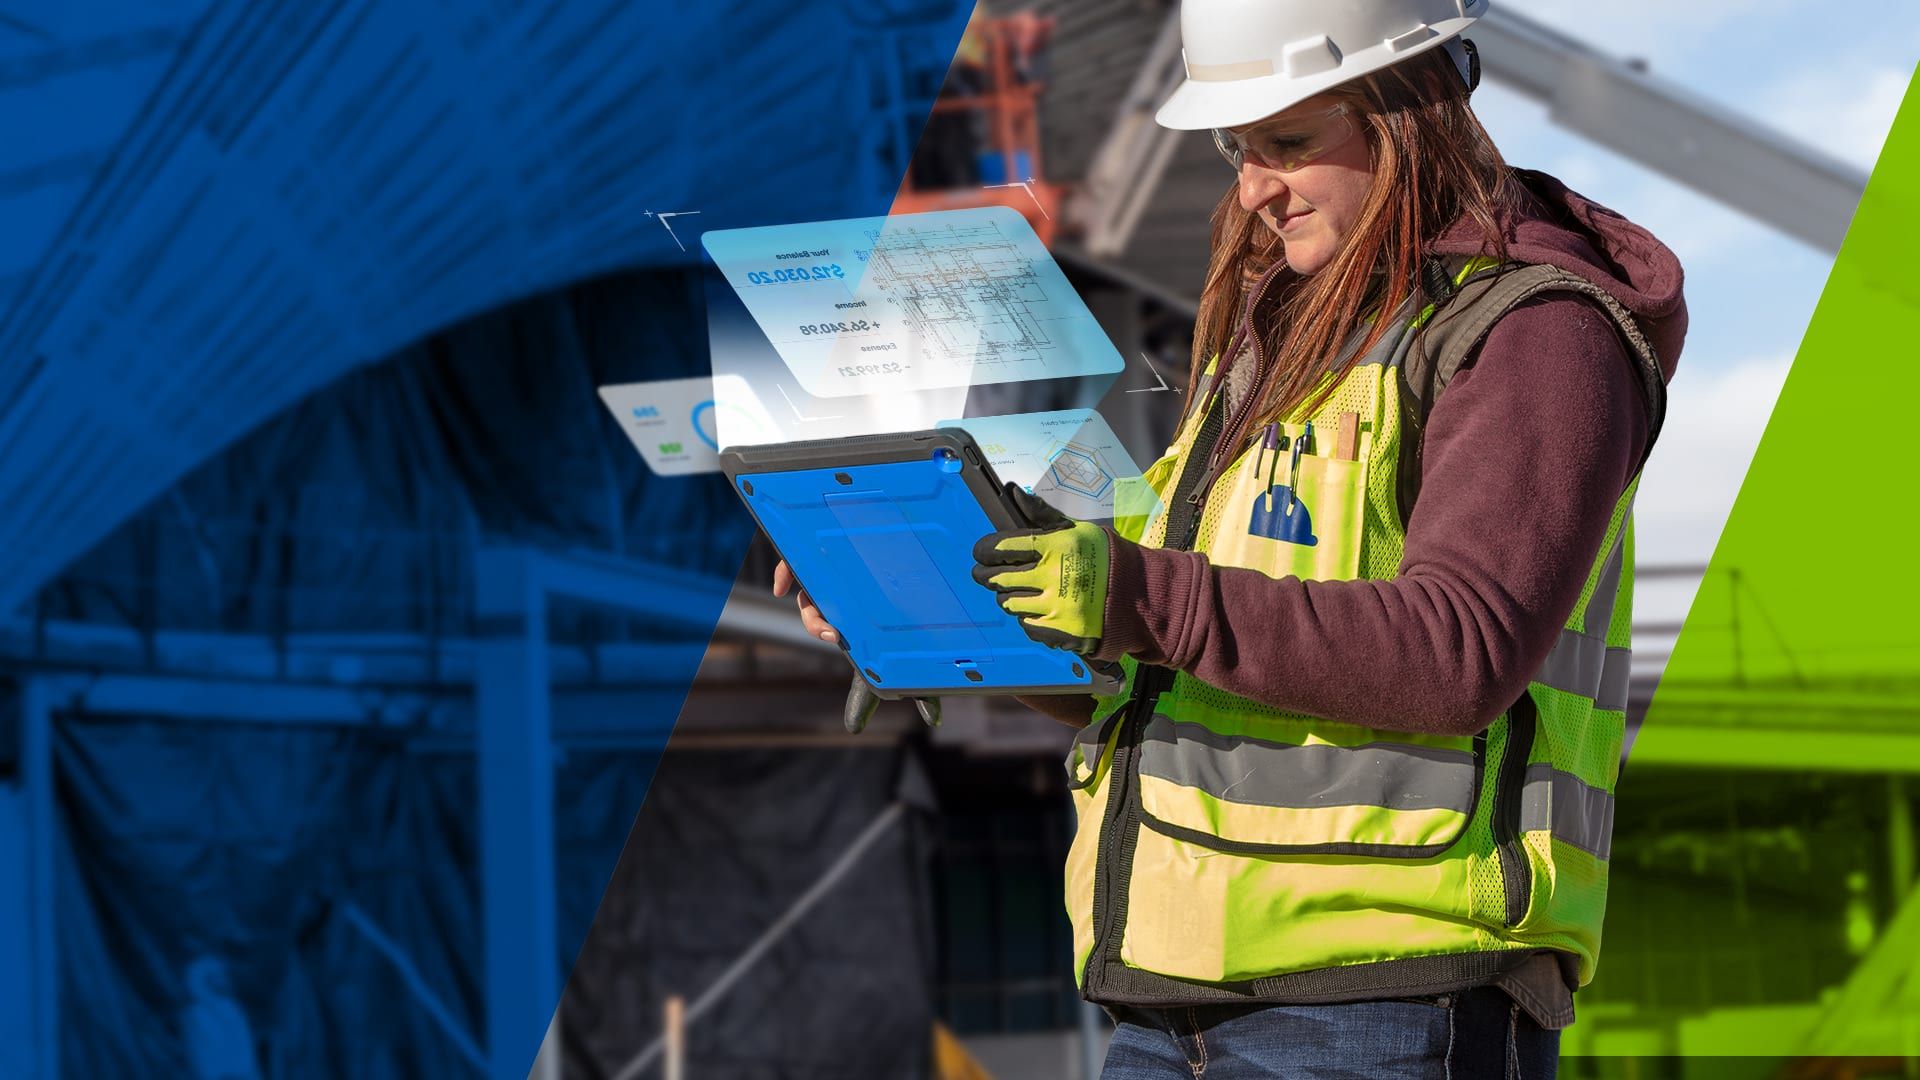 How Specialty Contractors Can Maximize Their Data [webinar]